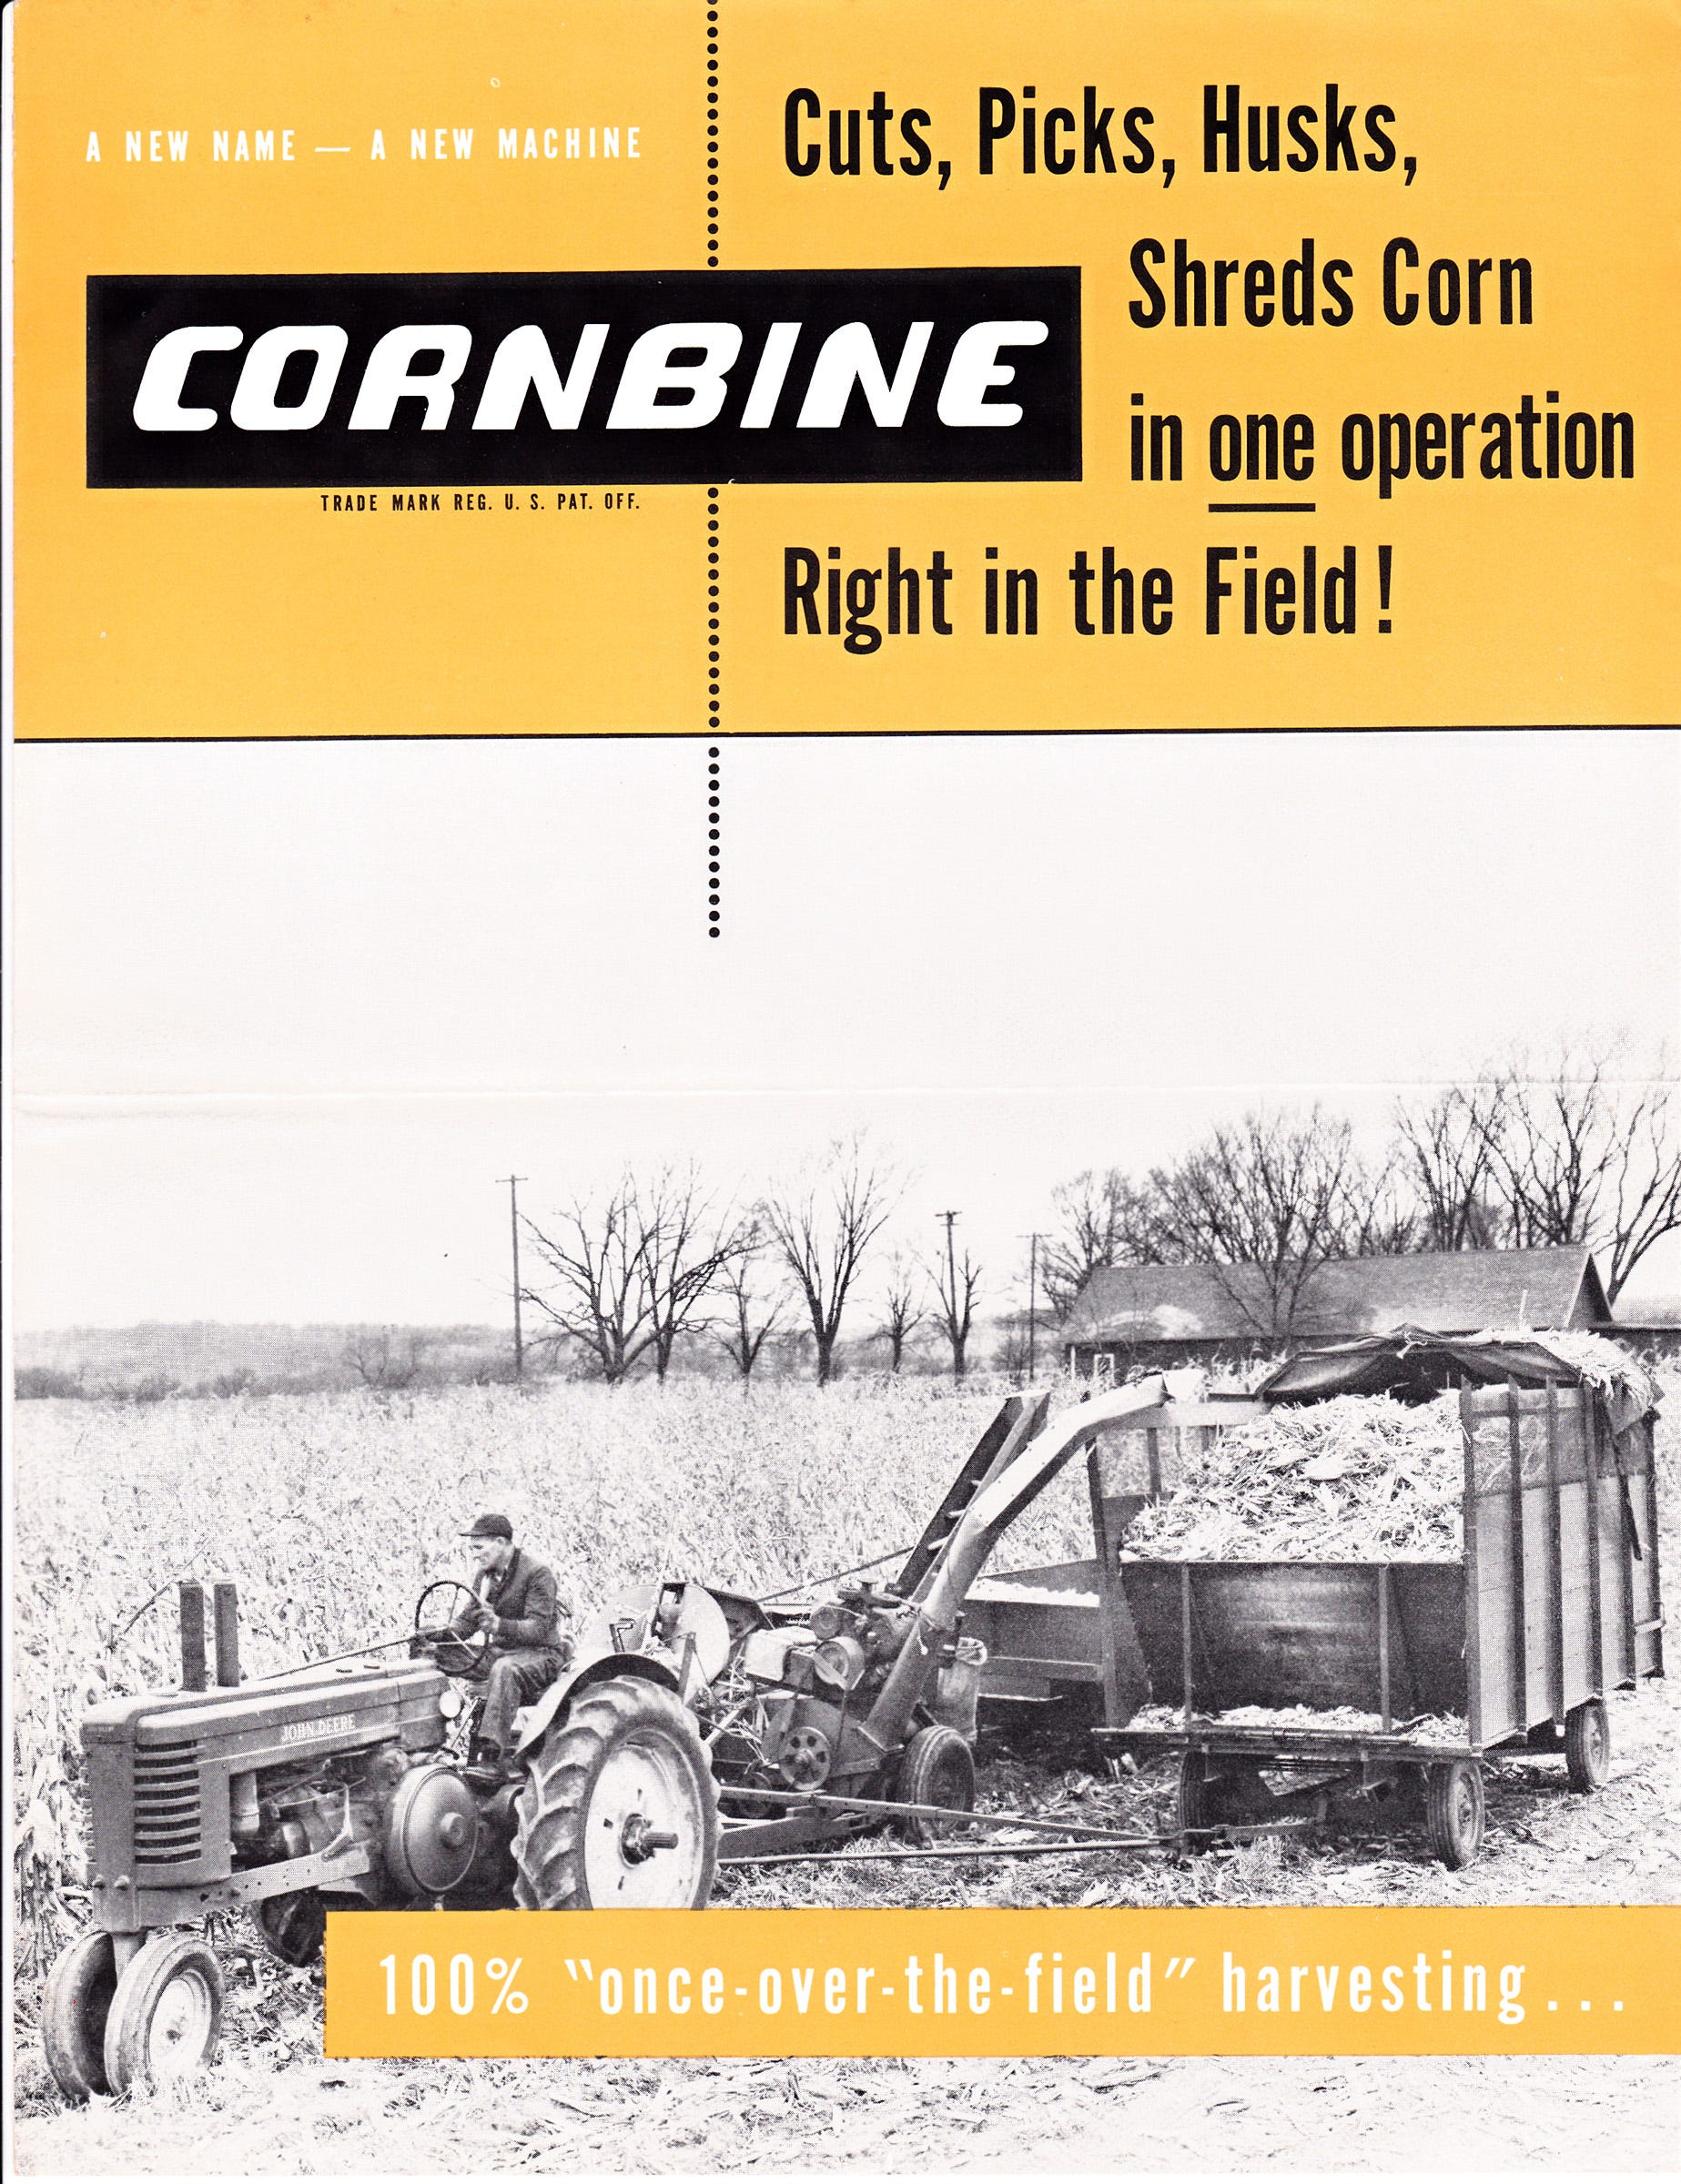 The Rosenthal company of Milwaukee had an unusual design called the Cornbine. Pictured is a brochure from 1950.